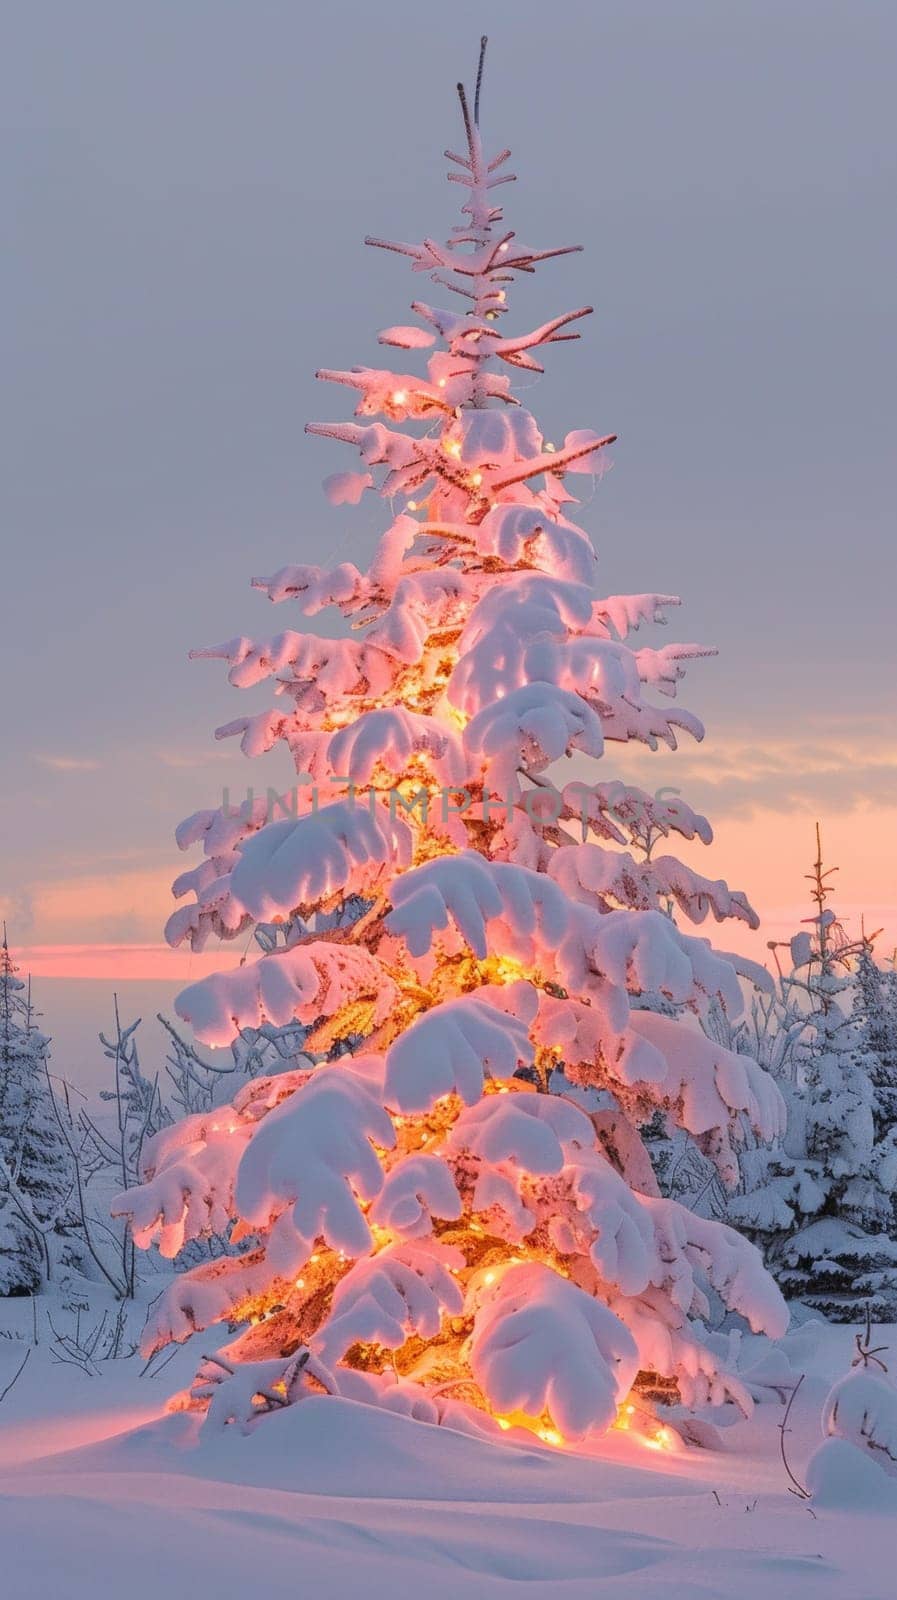 A snow covered tree with lights on it in the middle of a field